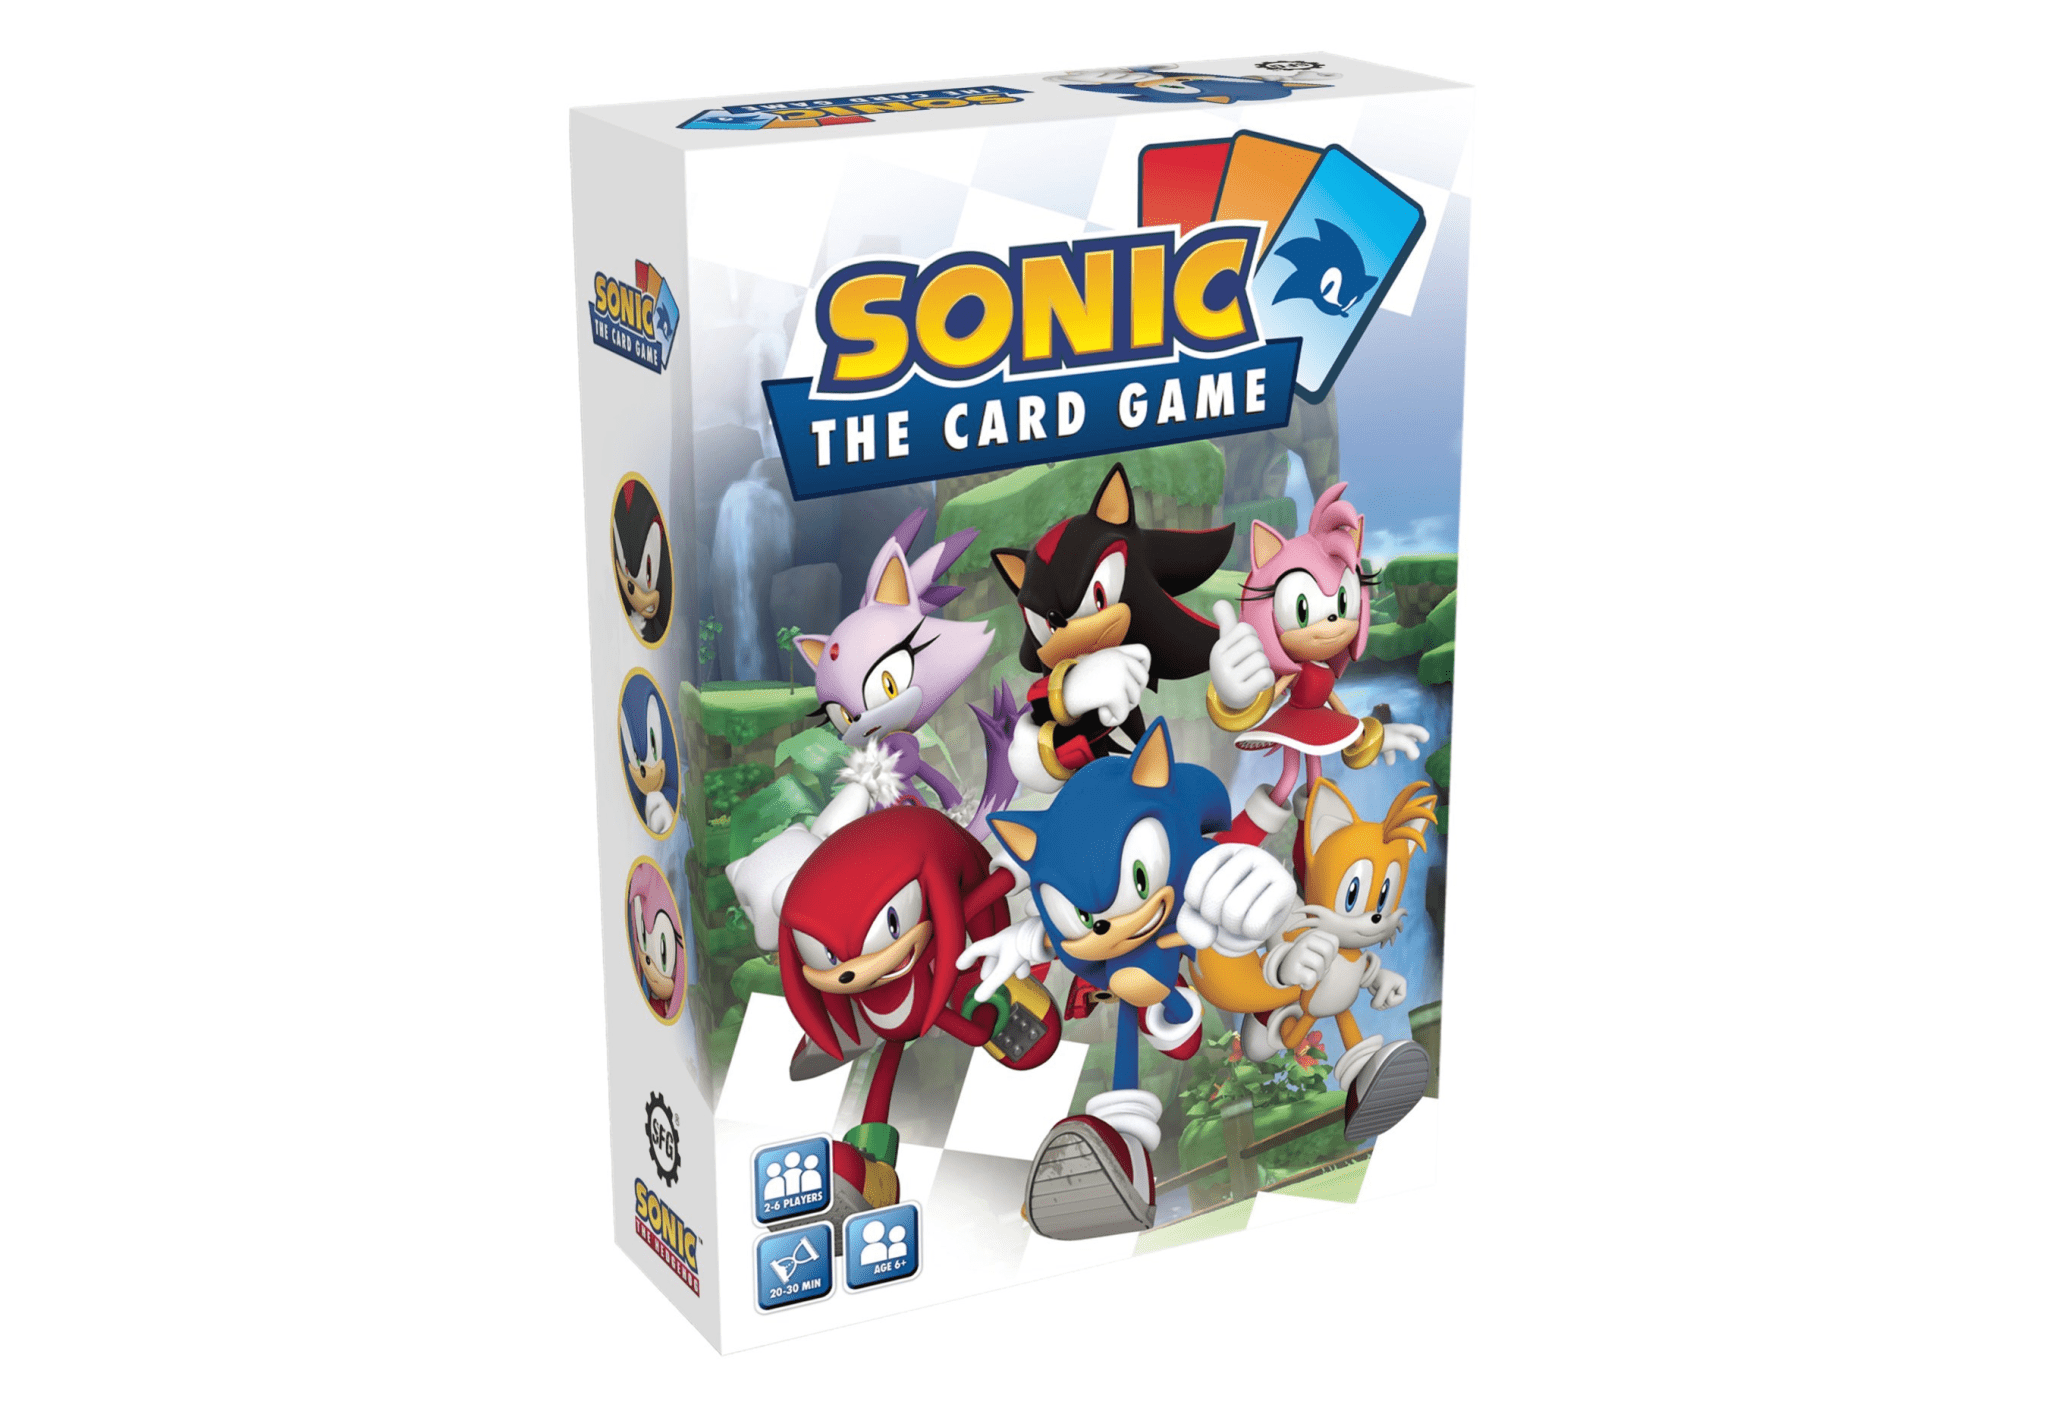 https://www.pokemonmillennium.net/wp-content/uploads/2021/04/sonic-the-card-game.png